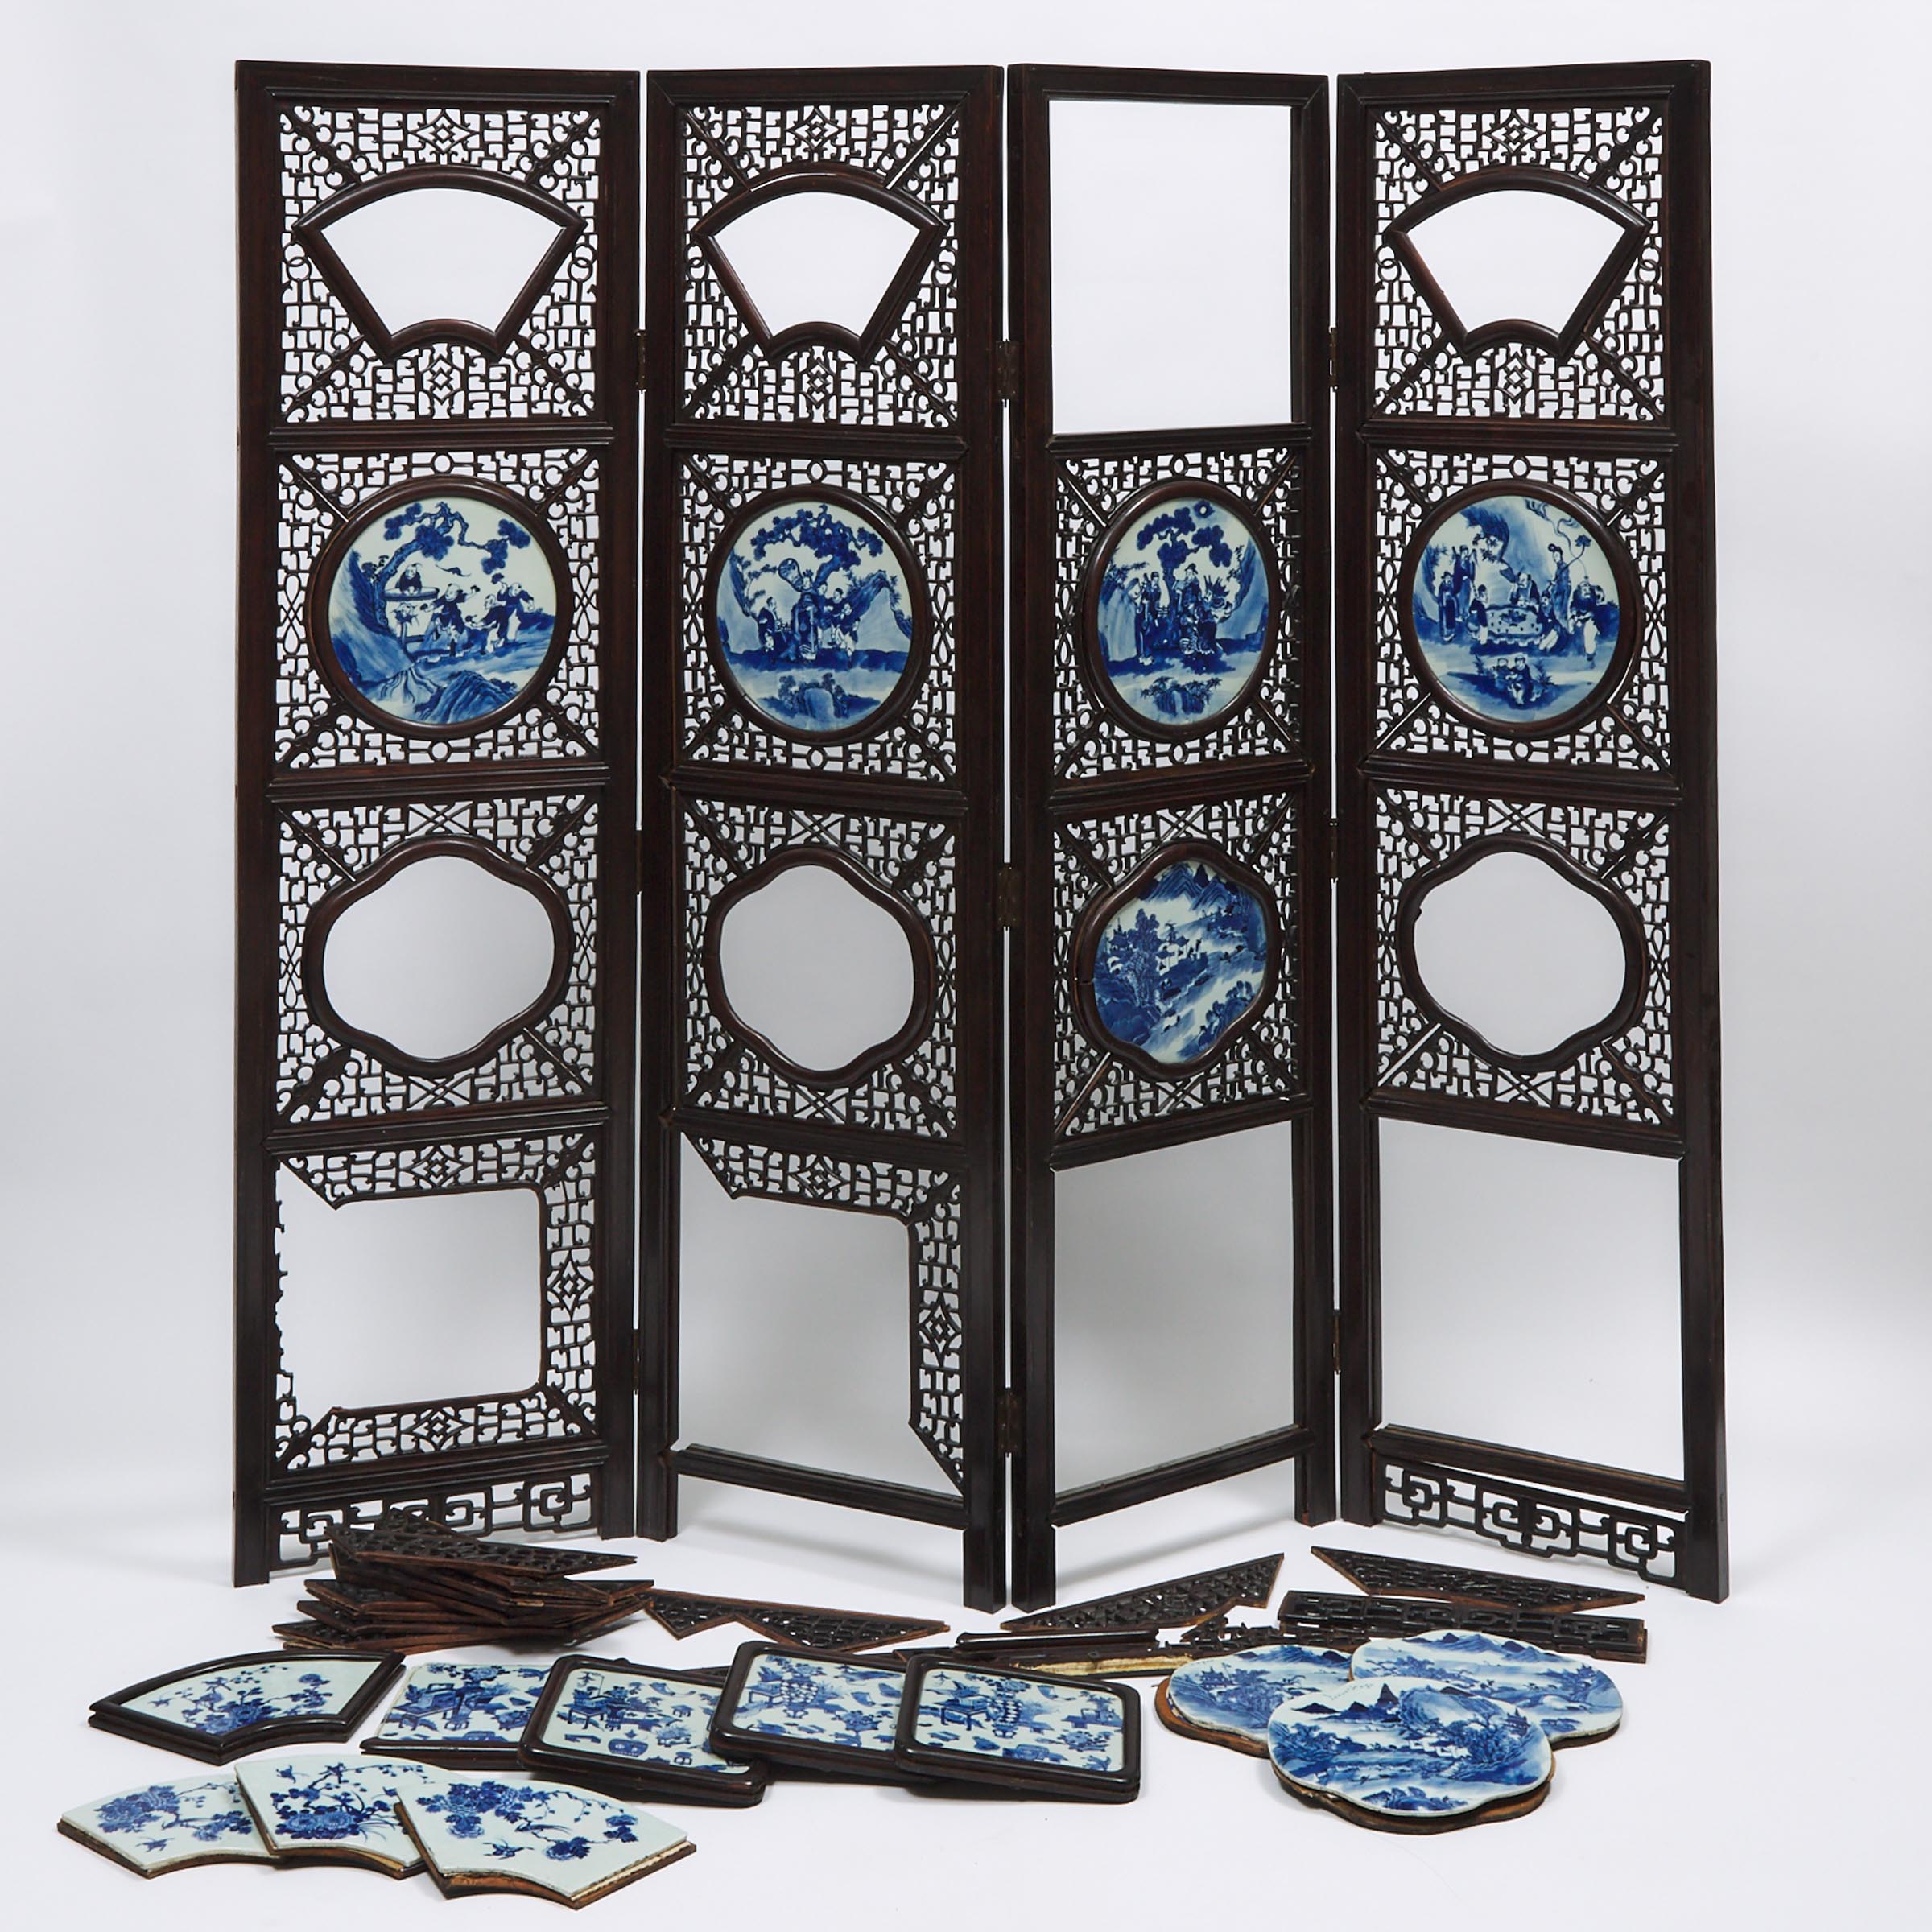 A Four-Panel Blue and White Porcelain Inlaid Wood Screen, Early 20th Century